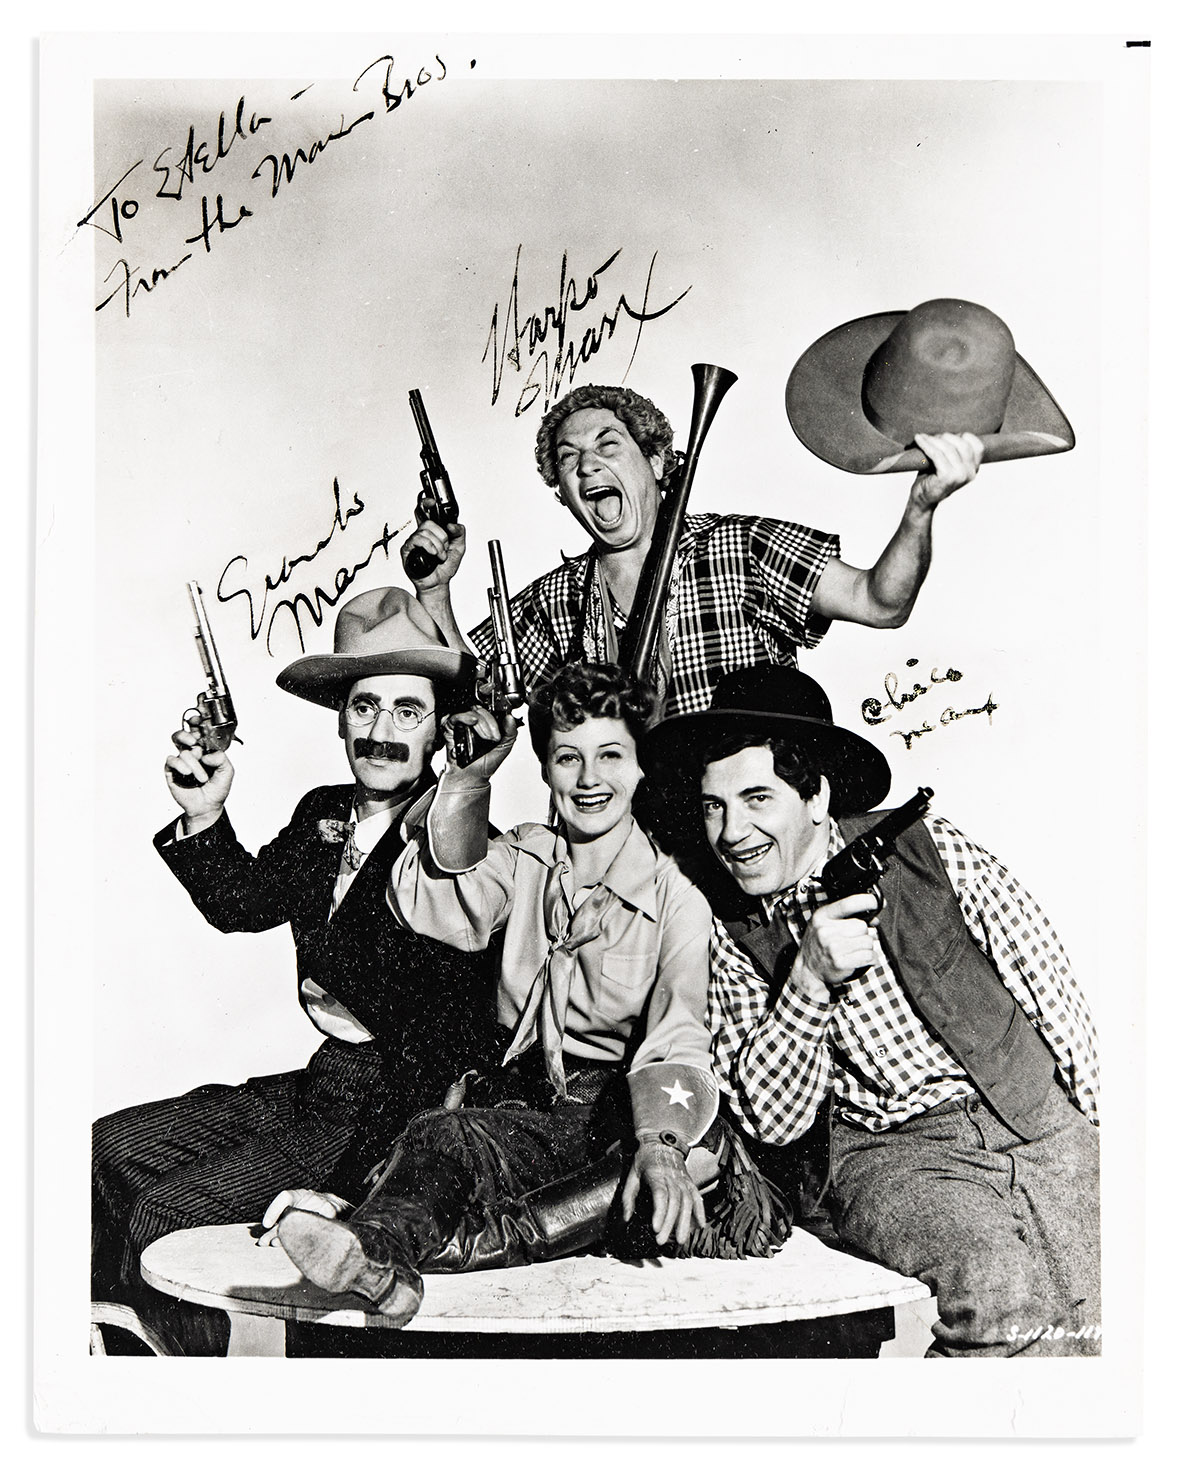 MARX BROTHERS. Photograph Signed, by Harpo, Groucho, and Chico, half-length group portrait showing them in costumes from Go West.